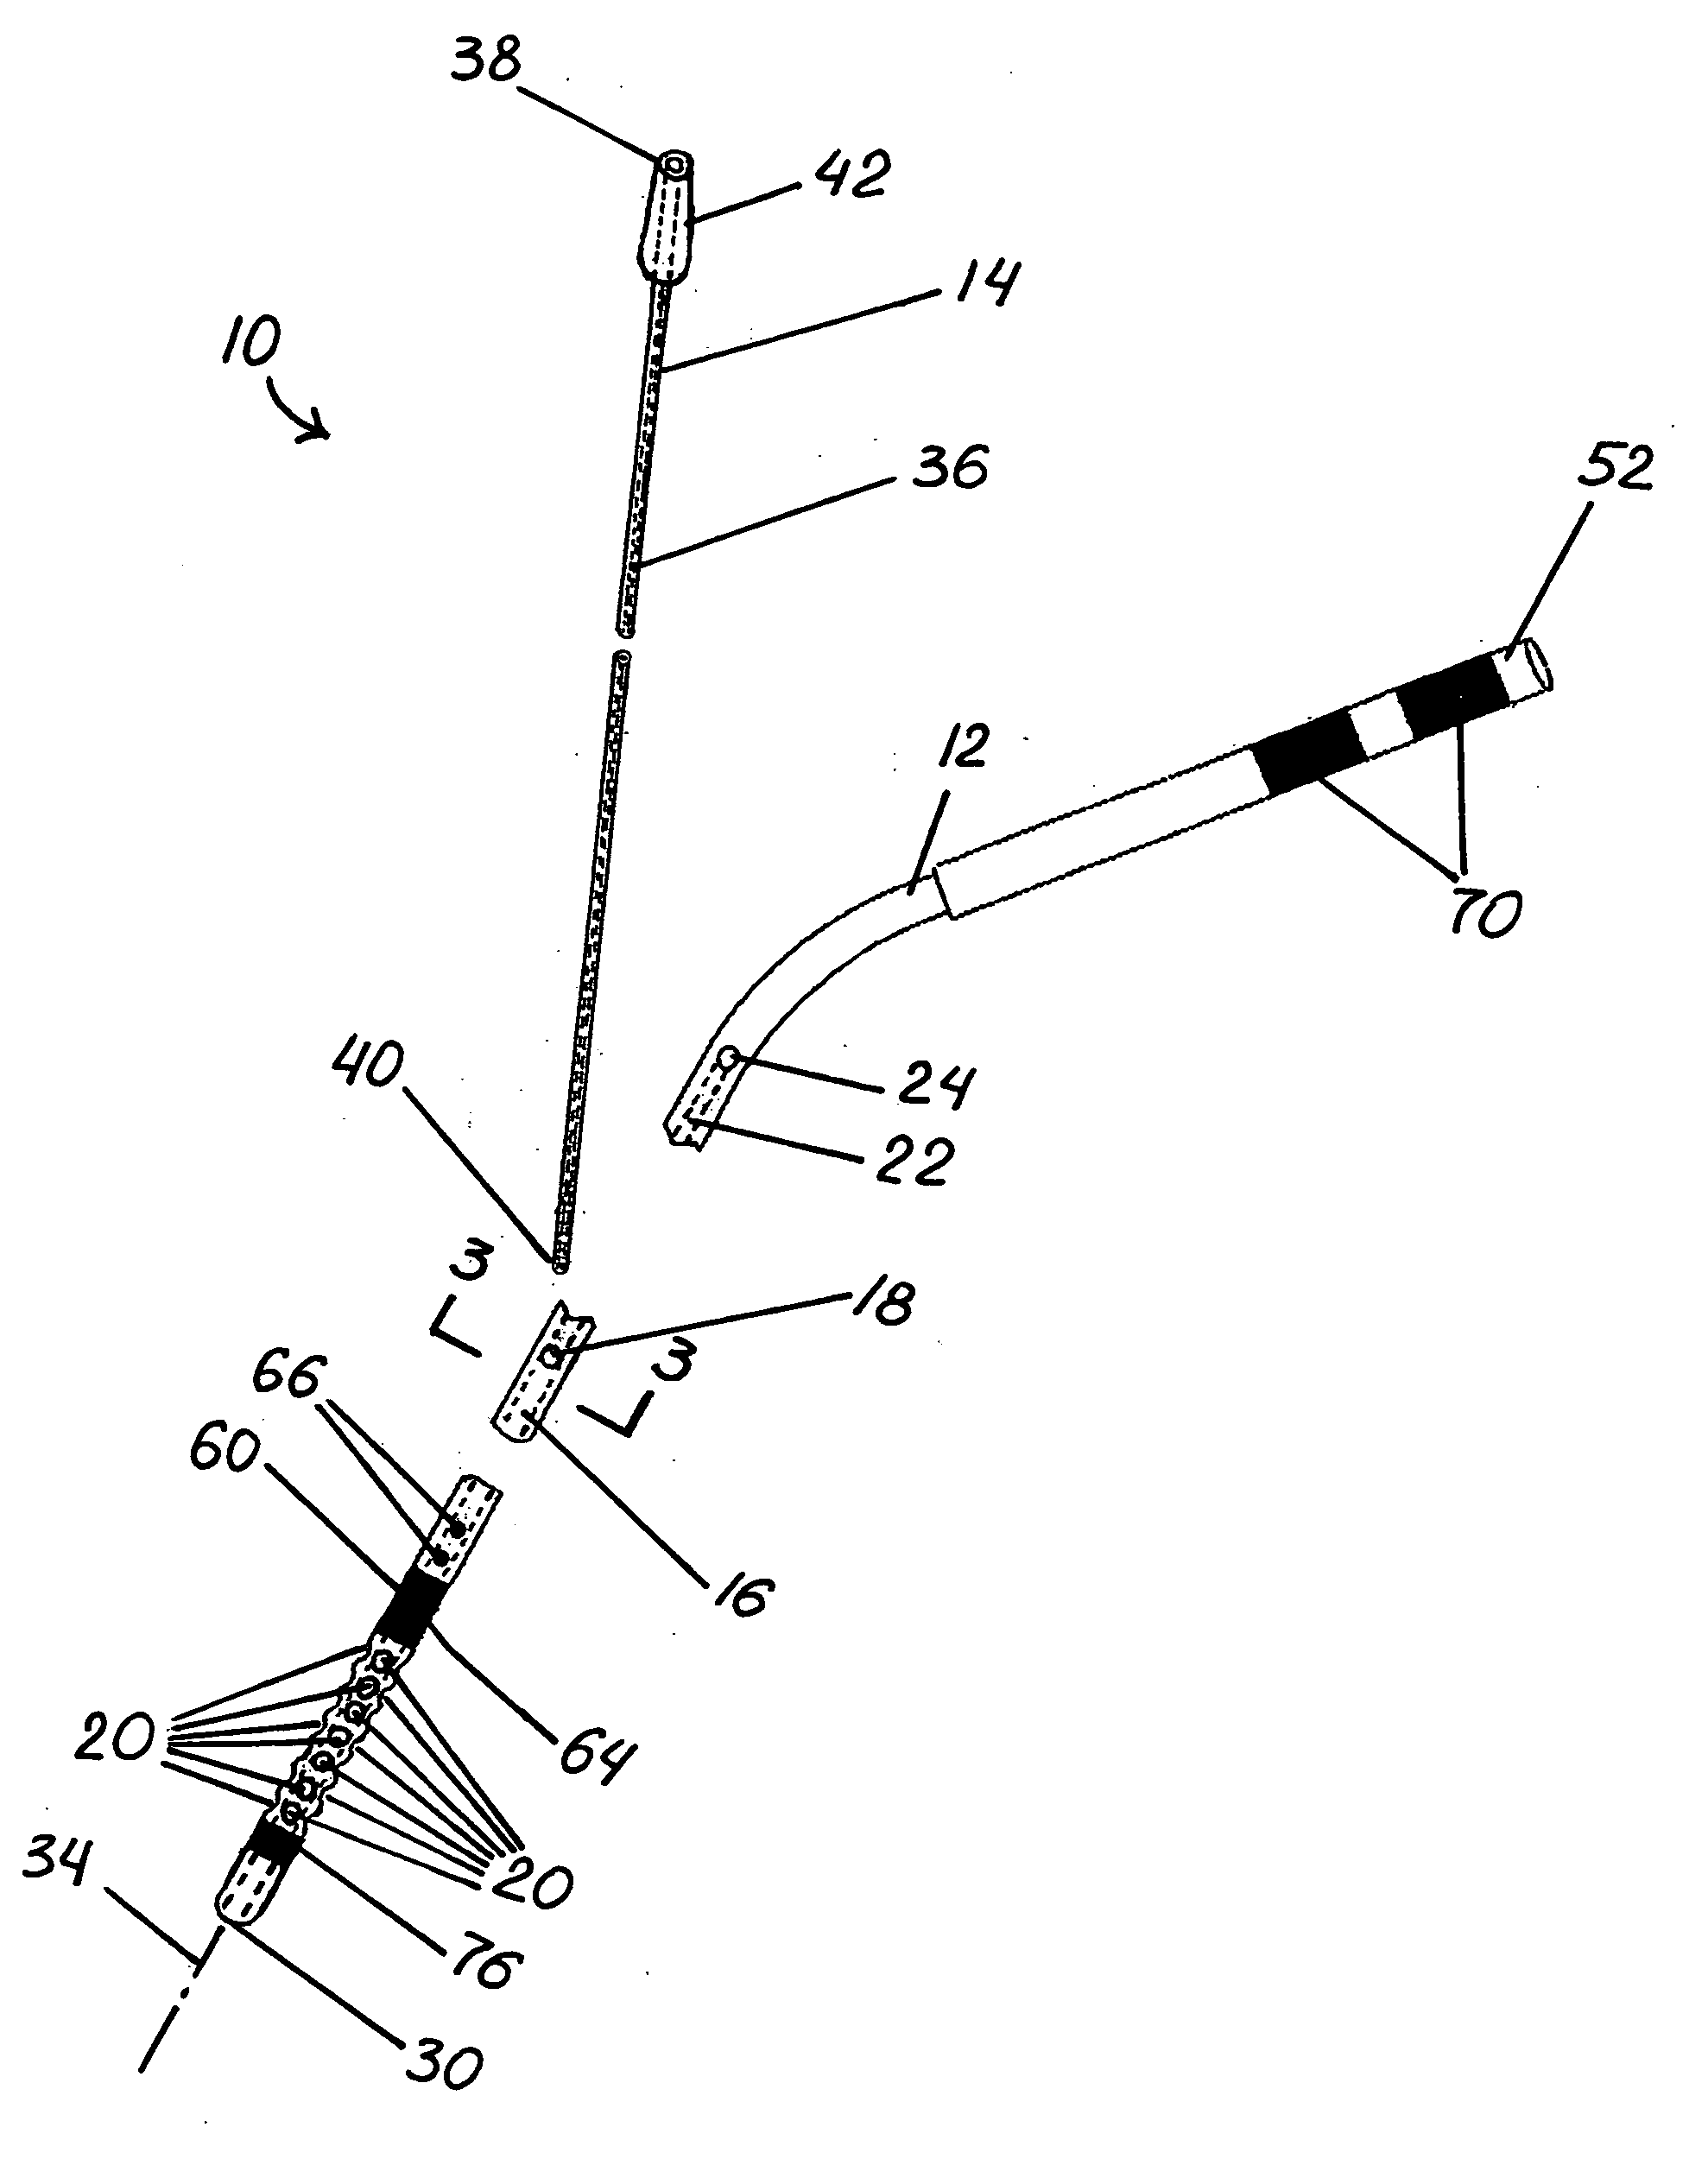 Catheter assembly for intracranial treatment using dual lumens